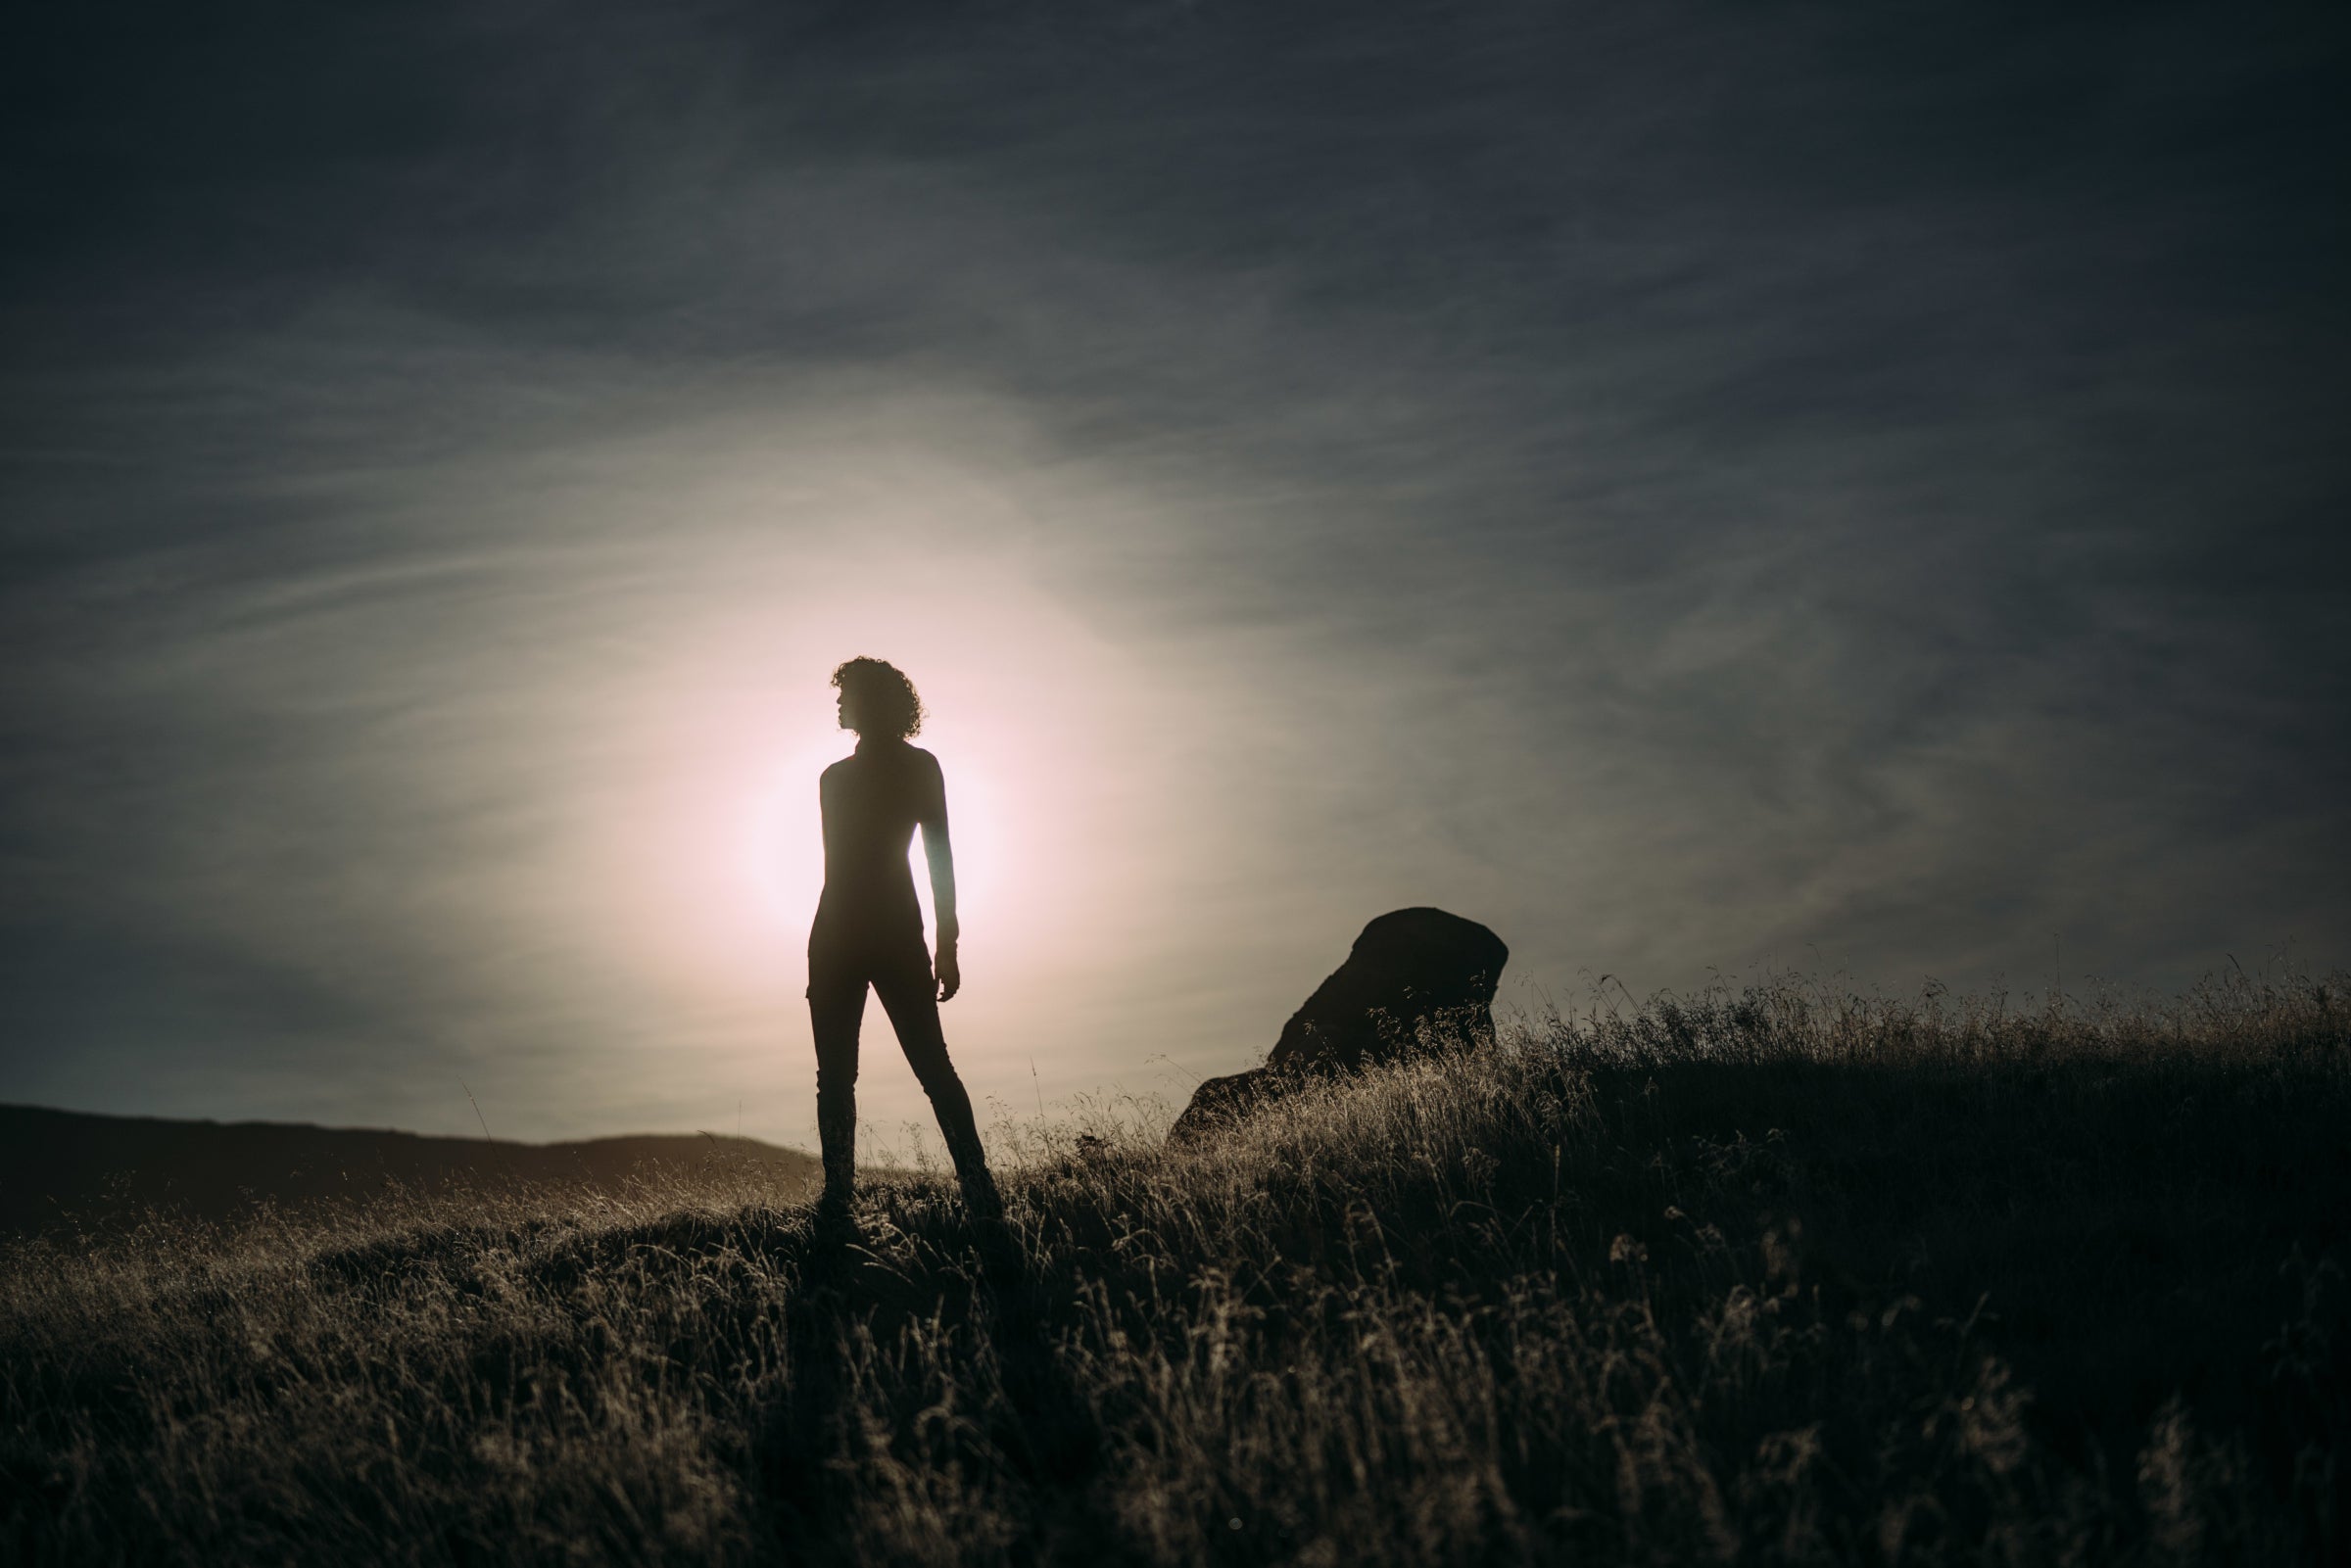 A silhouette of a person standing on a hilltop, backlit by the setting sun with a clear sky.